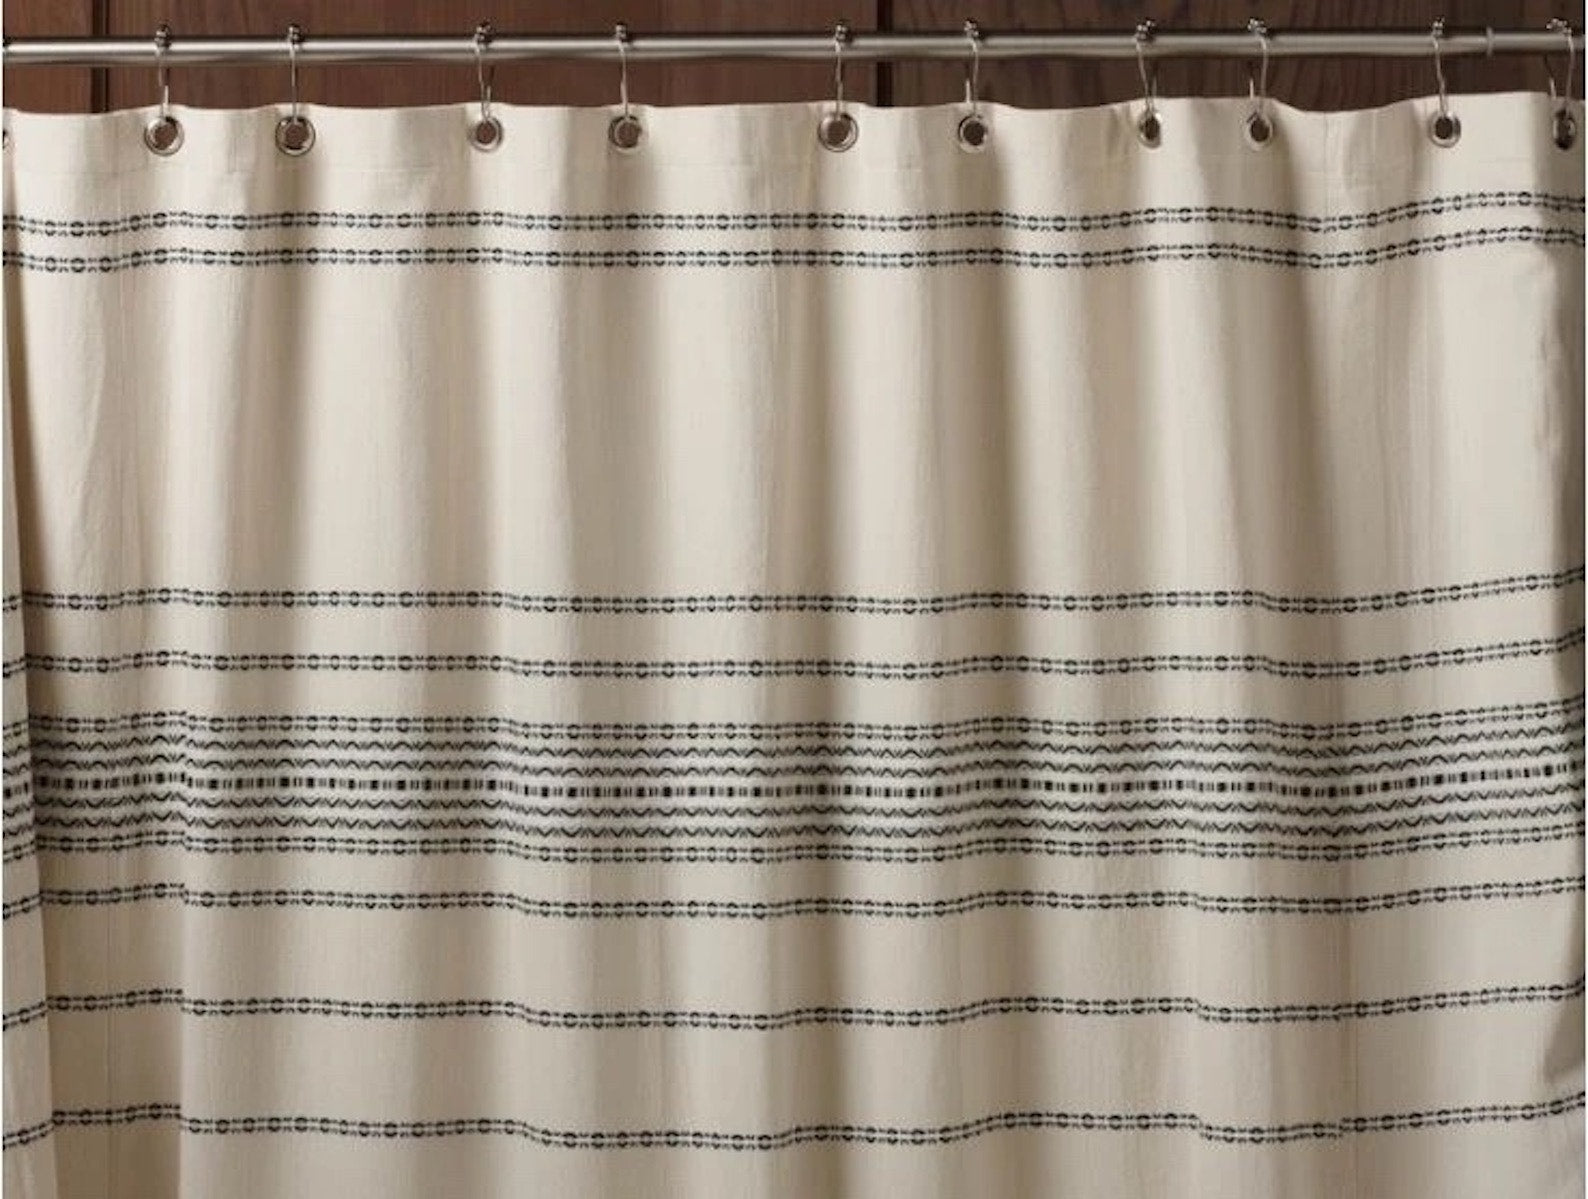 Stripes in the Shower